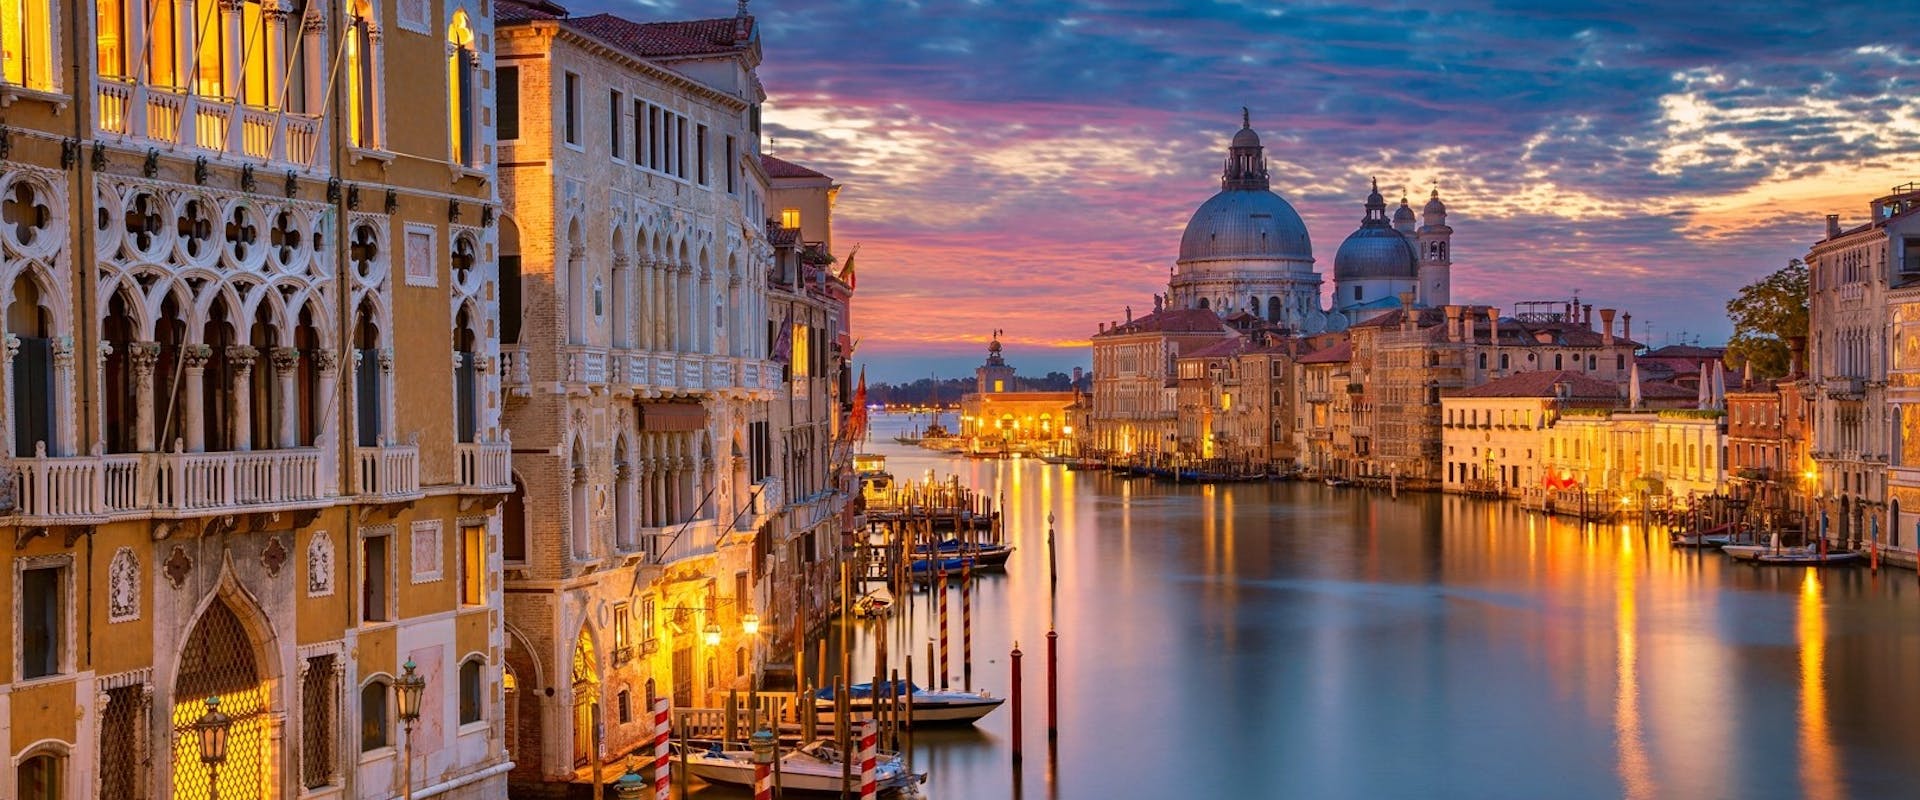 canal of venice